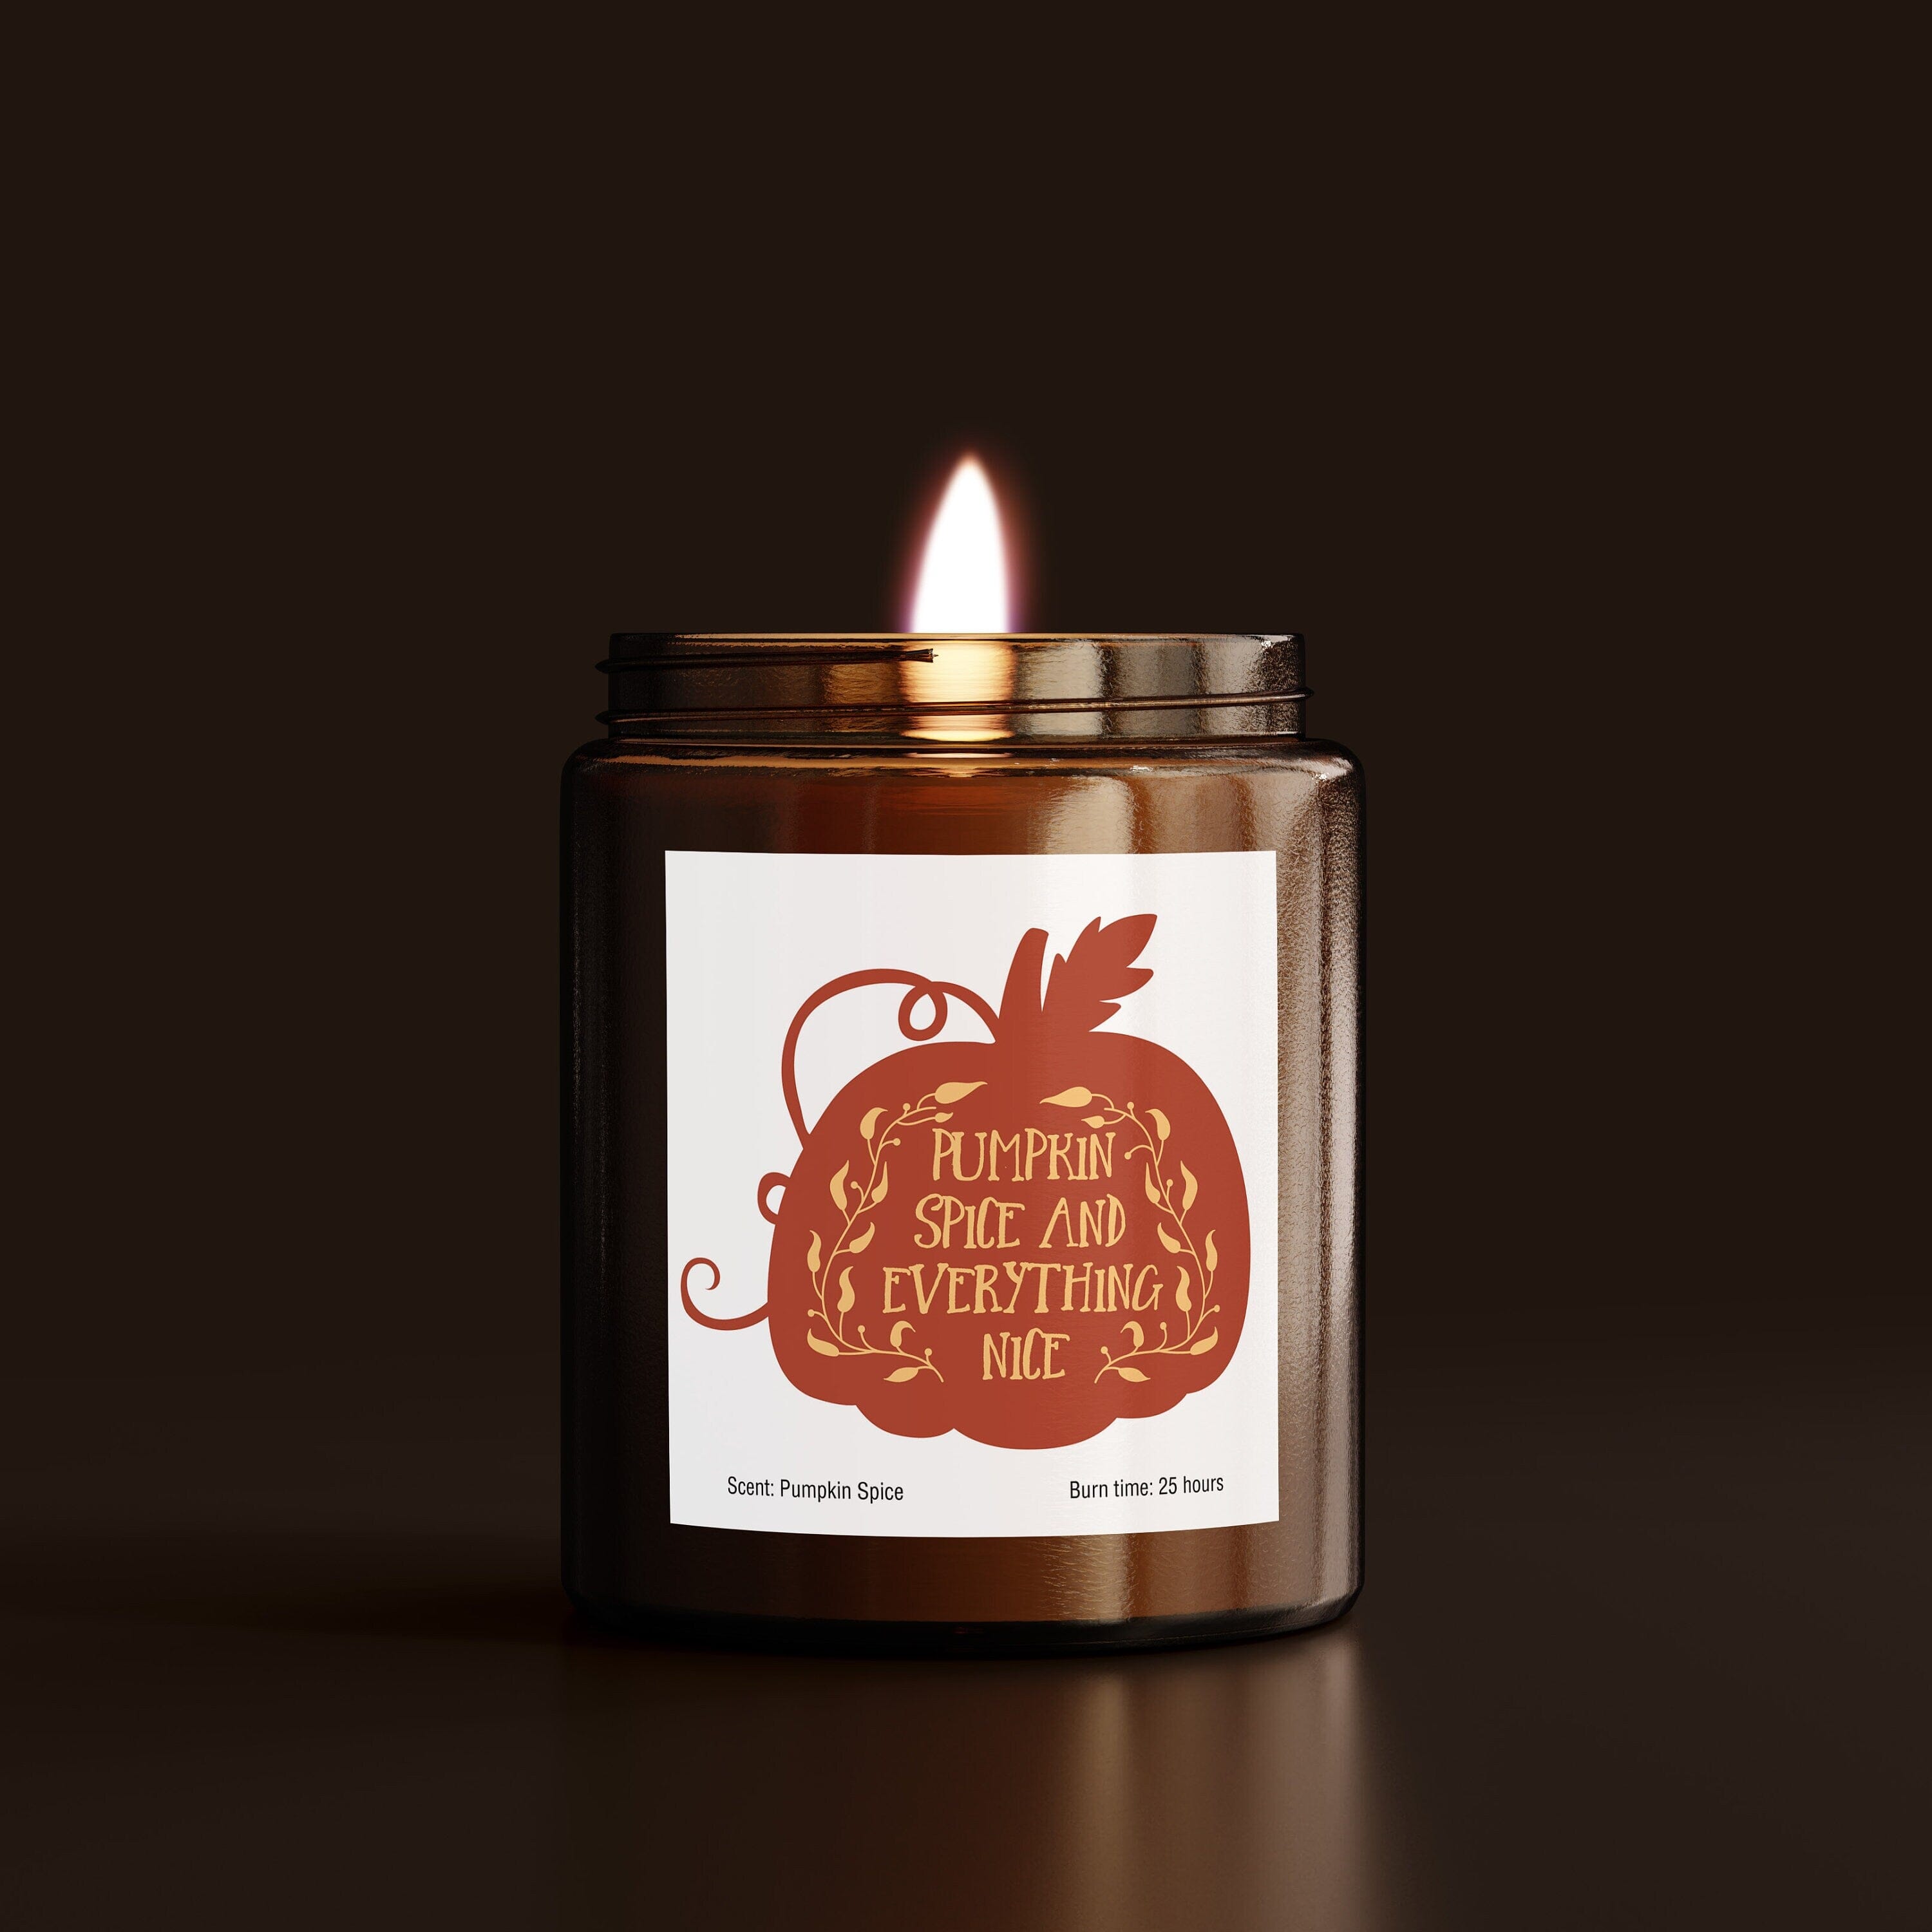 Pumpkin Spice Soy Wax Candle, Scented Candle, Hand-Poured Cosy Autumn Gift for Friends Mum Dad Grandma Home Décor